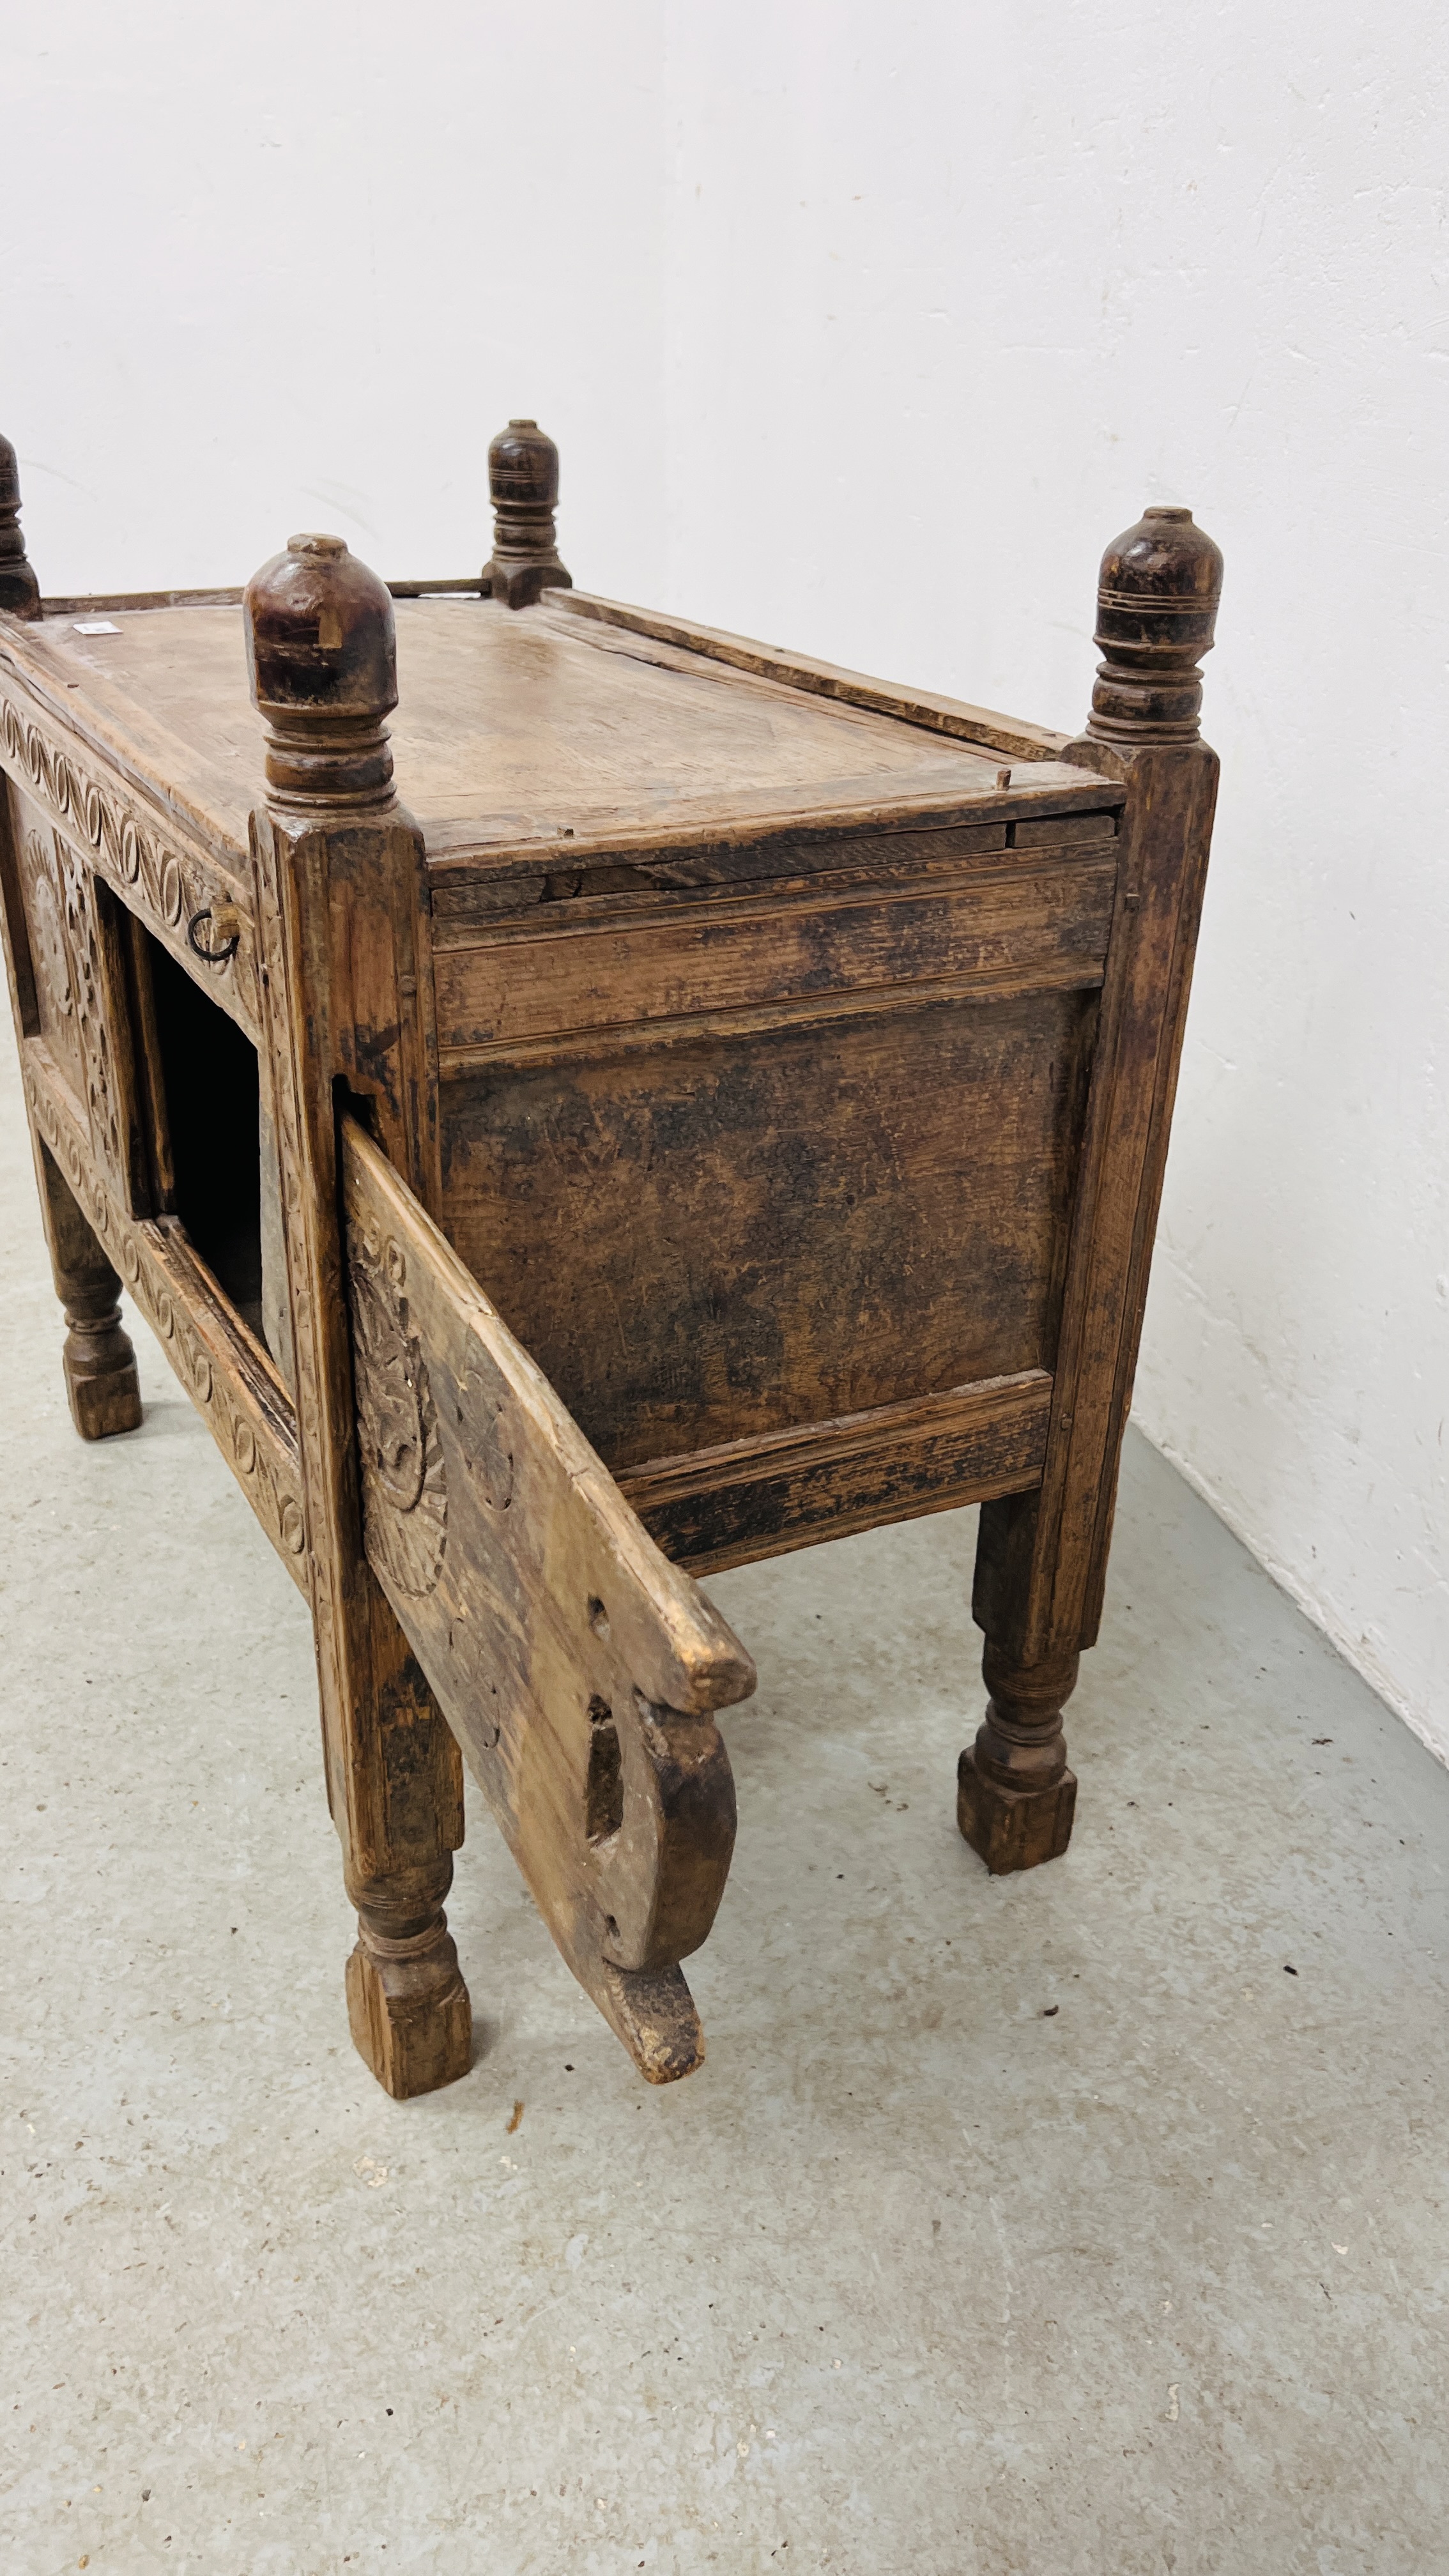 AN EASTERN HAND CARVED C19TH. DOWRY CHEST/CUPBOARD, WIDTH 71CM. DEPTH 40CM. HEIGHT 68CM. - Image 13 of 17